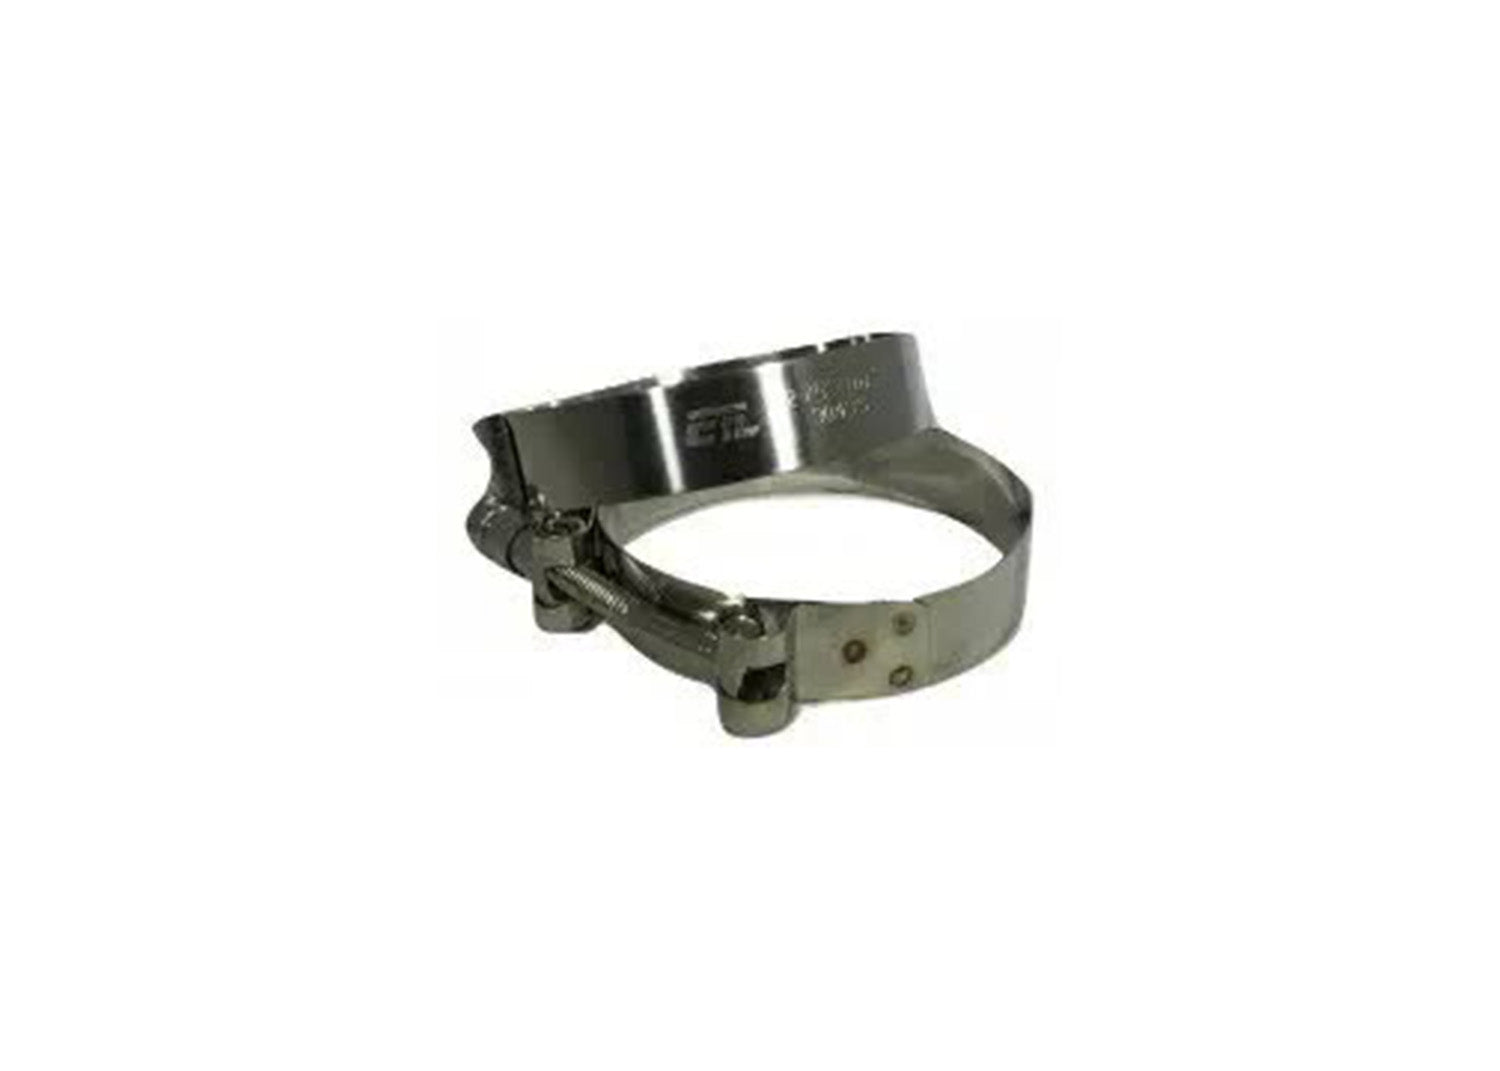 T-Bolt Clamp for use with 3.50" or 3.75" Inside Diameter Hose Coupling Part Number- 221011